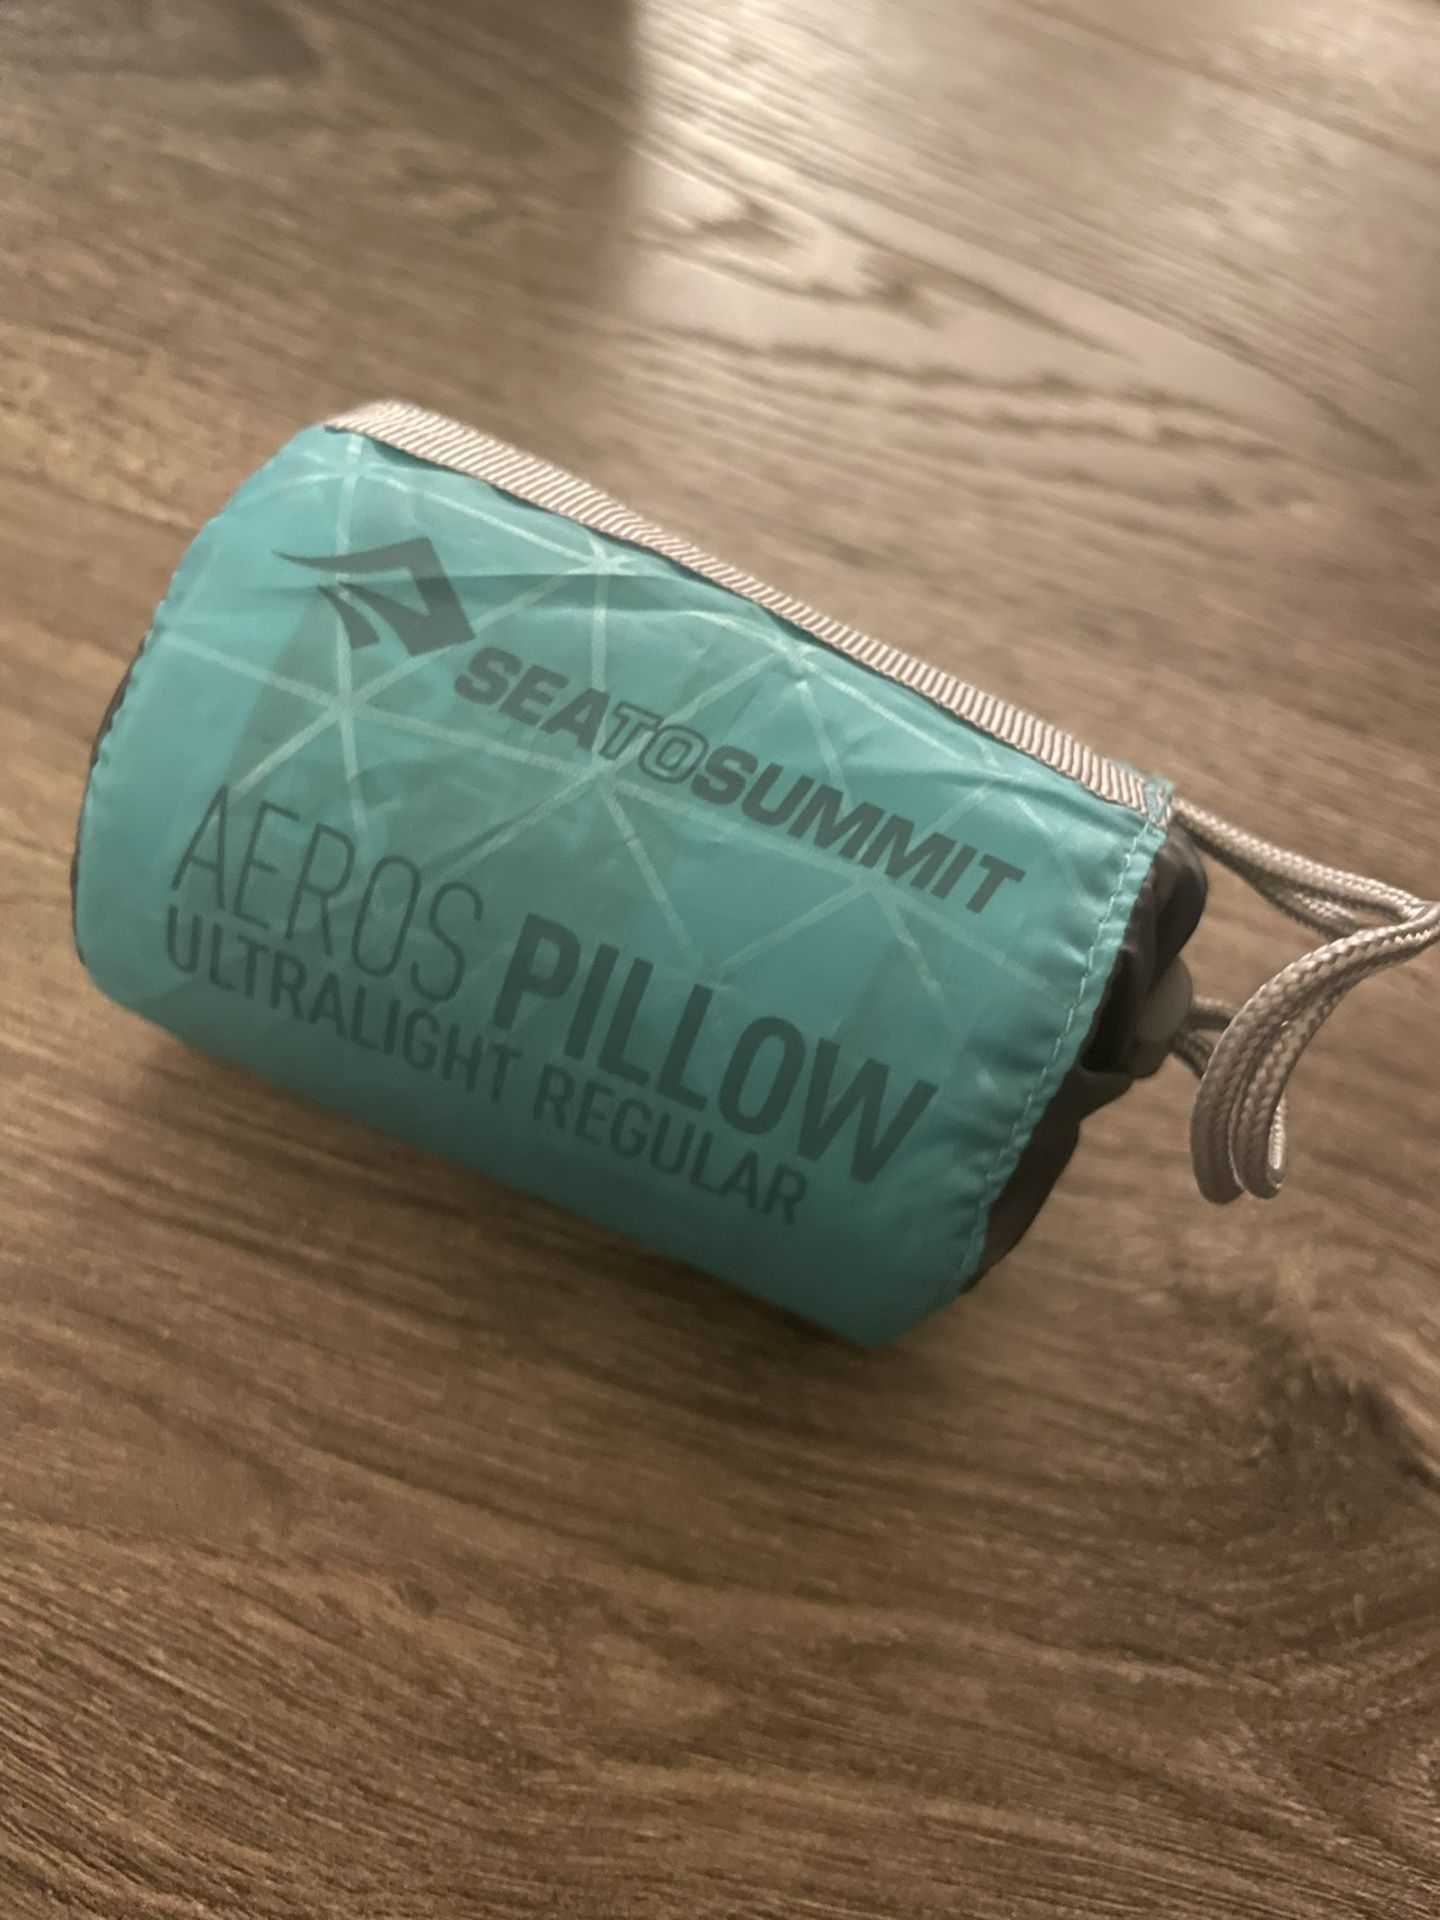 Sea To Summit Backpacking Aeros Pillow